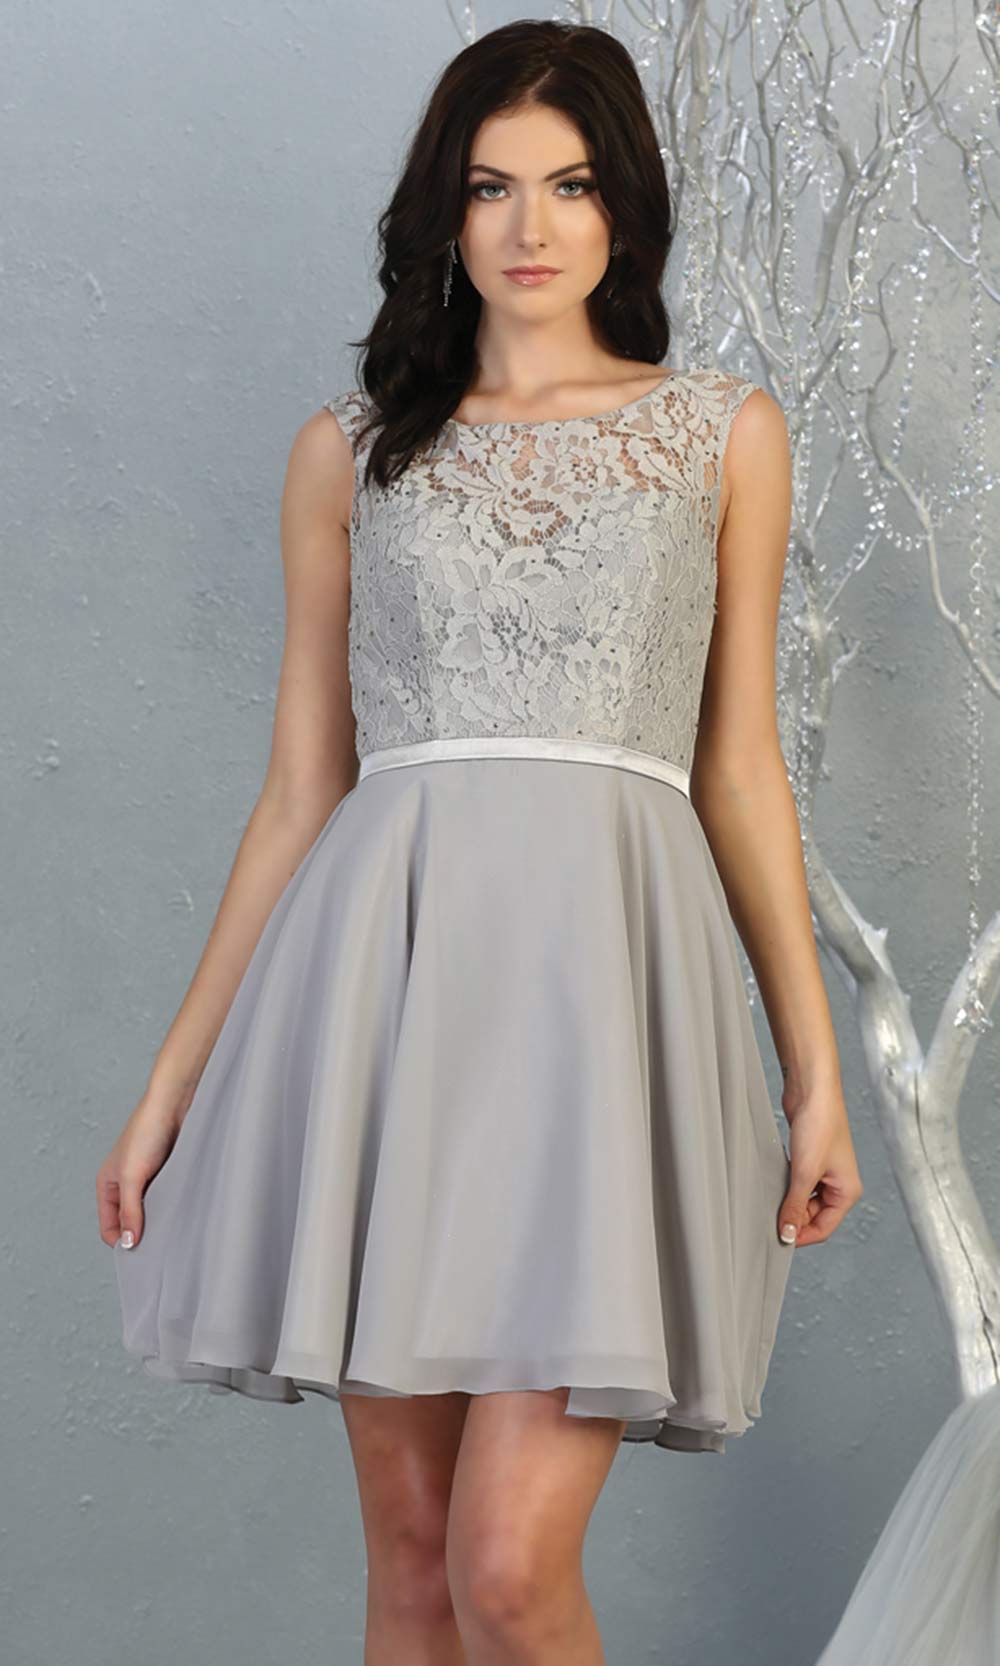 Mayqueen MQ1814 short silver gray high neck flowy grade 8 graduation dress w/ corset & simple skirt. Light Grey party dress is perfect for prom, graduation, grade 8 grad, confirmation dress, bat mitzvah dress, damas. Plus sizes avail for grad dress.jpggrade 8 grad dresses, graduation dresses